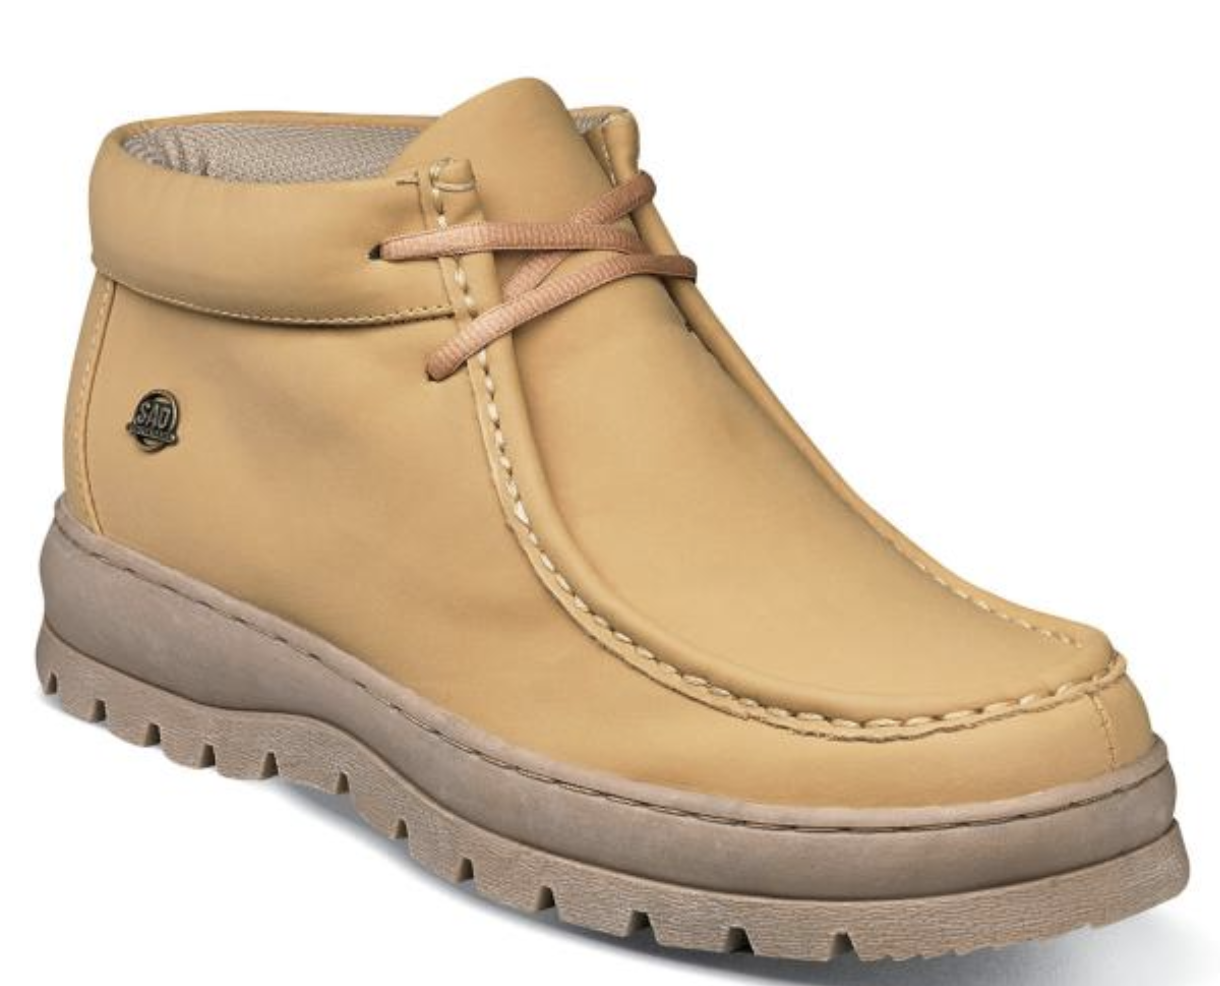 Stacy Adams New Mens Wally Moc Toe comfort wallabee Boot Lace Up Wheat 61004-267